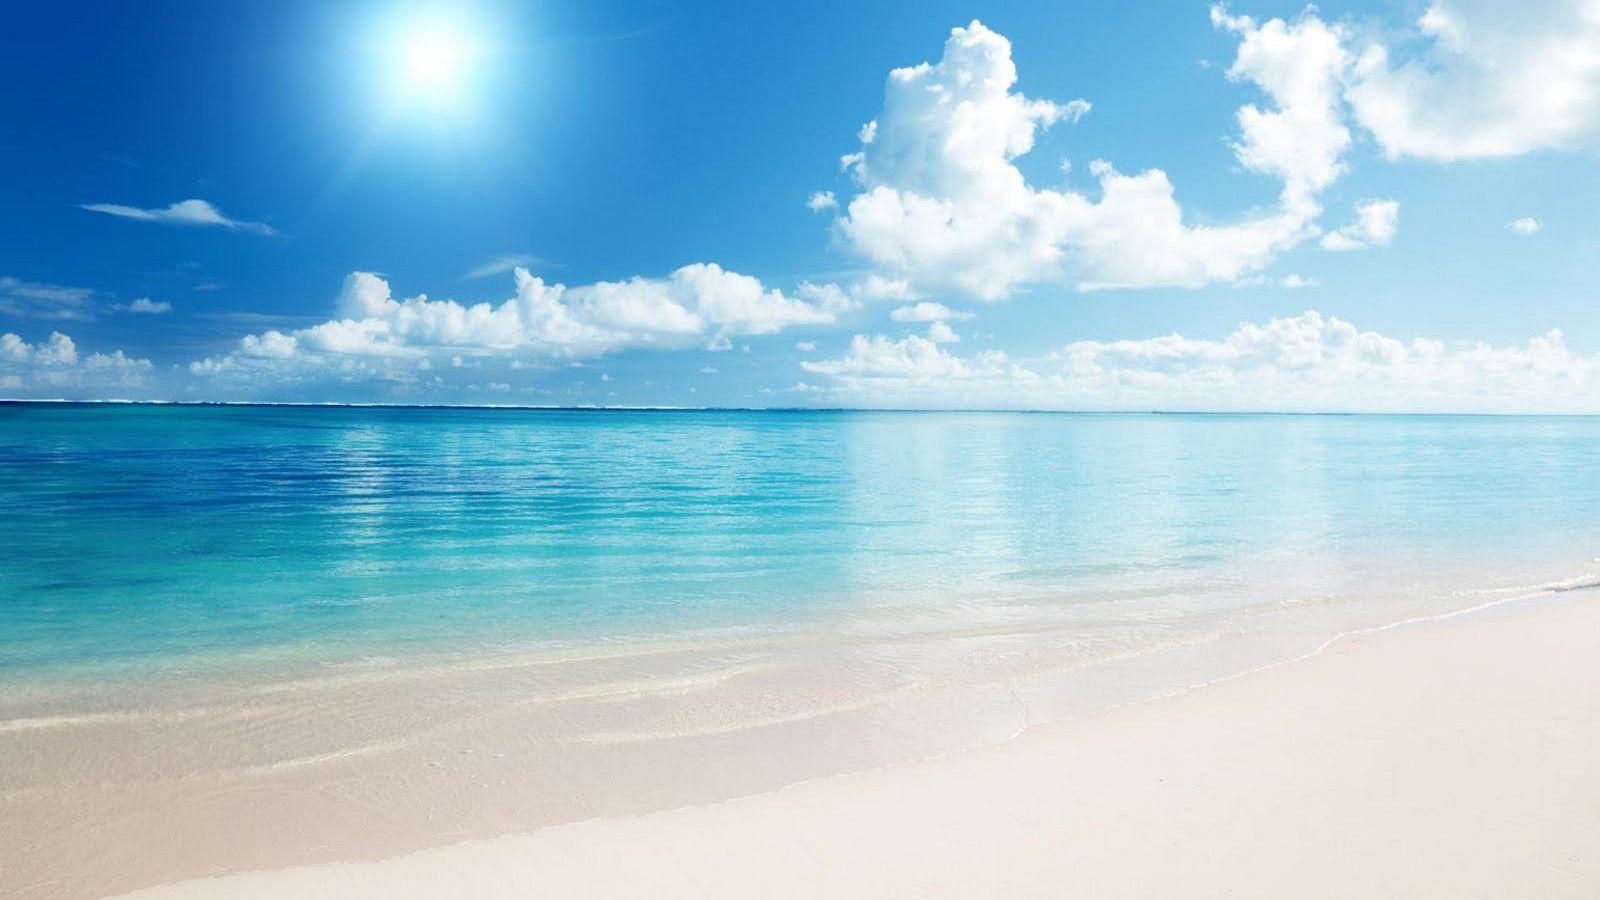 Free Beach Backgrounds Image 1600x900